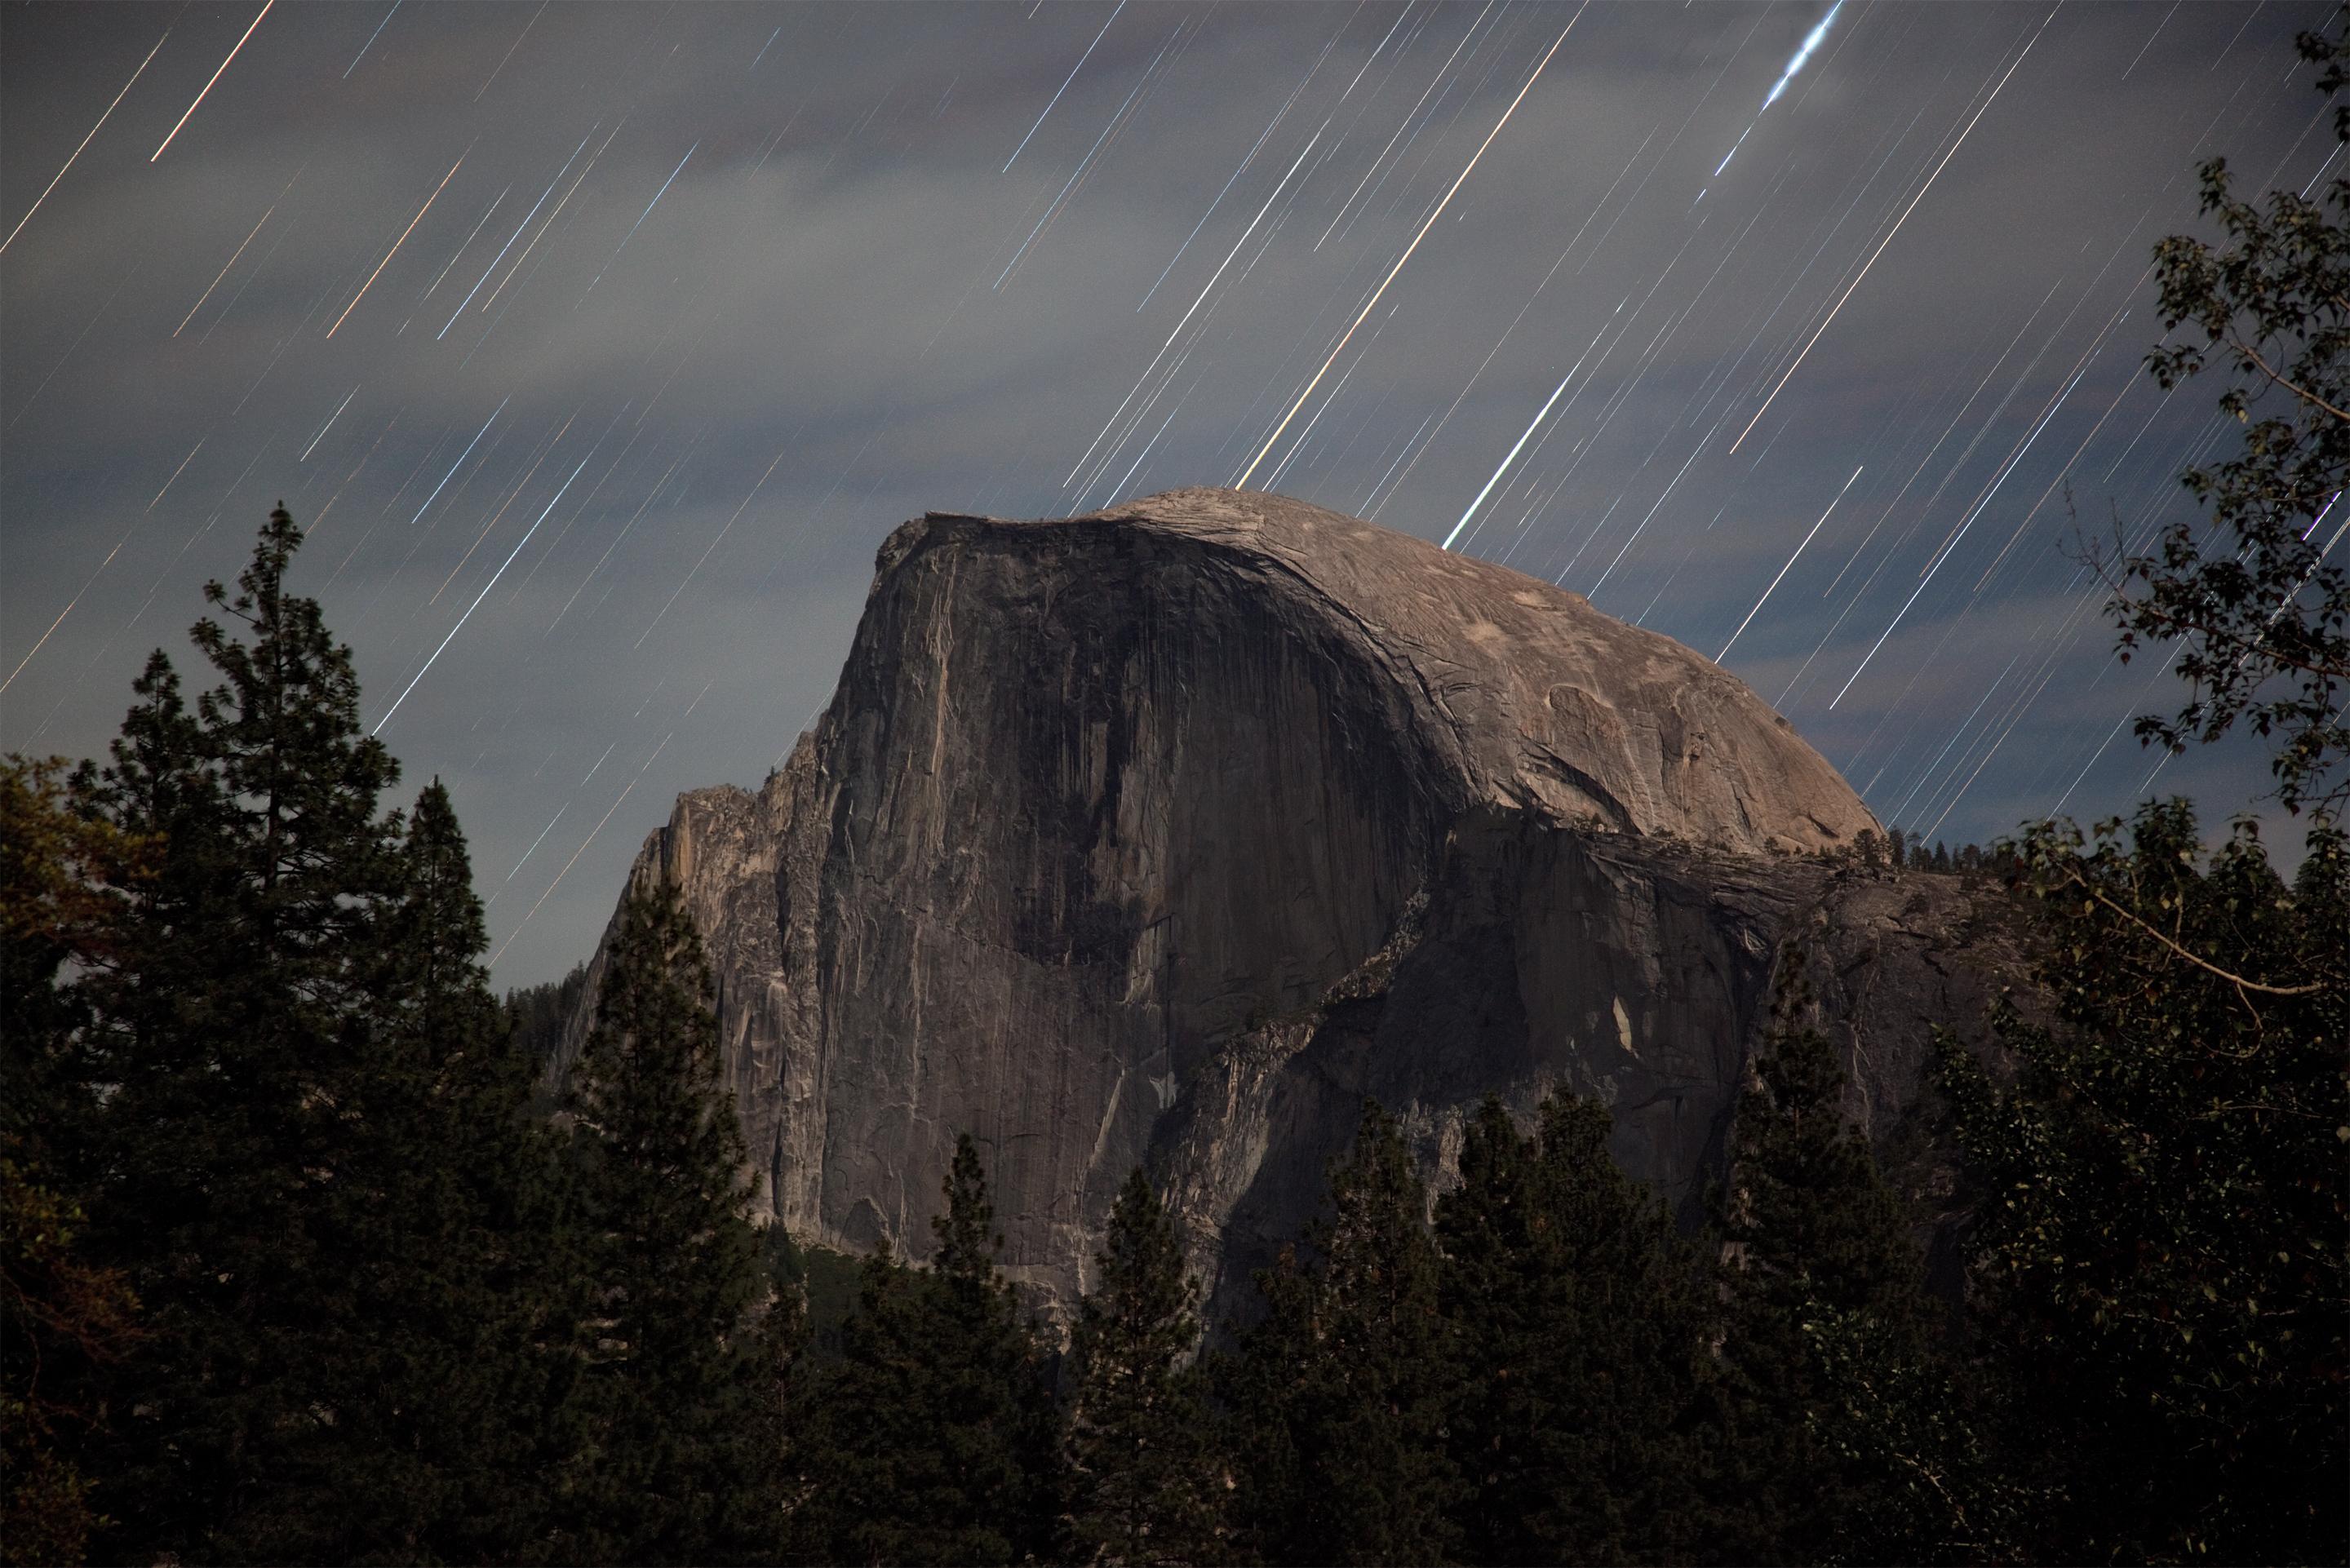 Yosemite star trail background for your iPhone, iPad or Mac